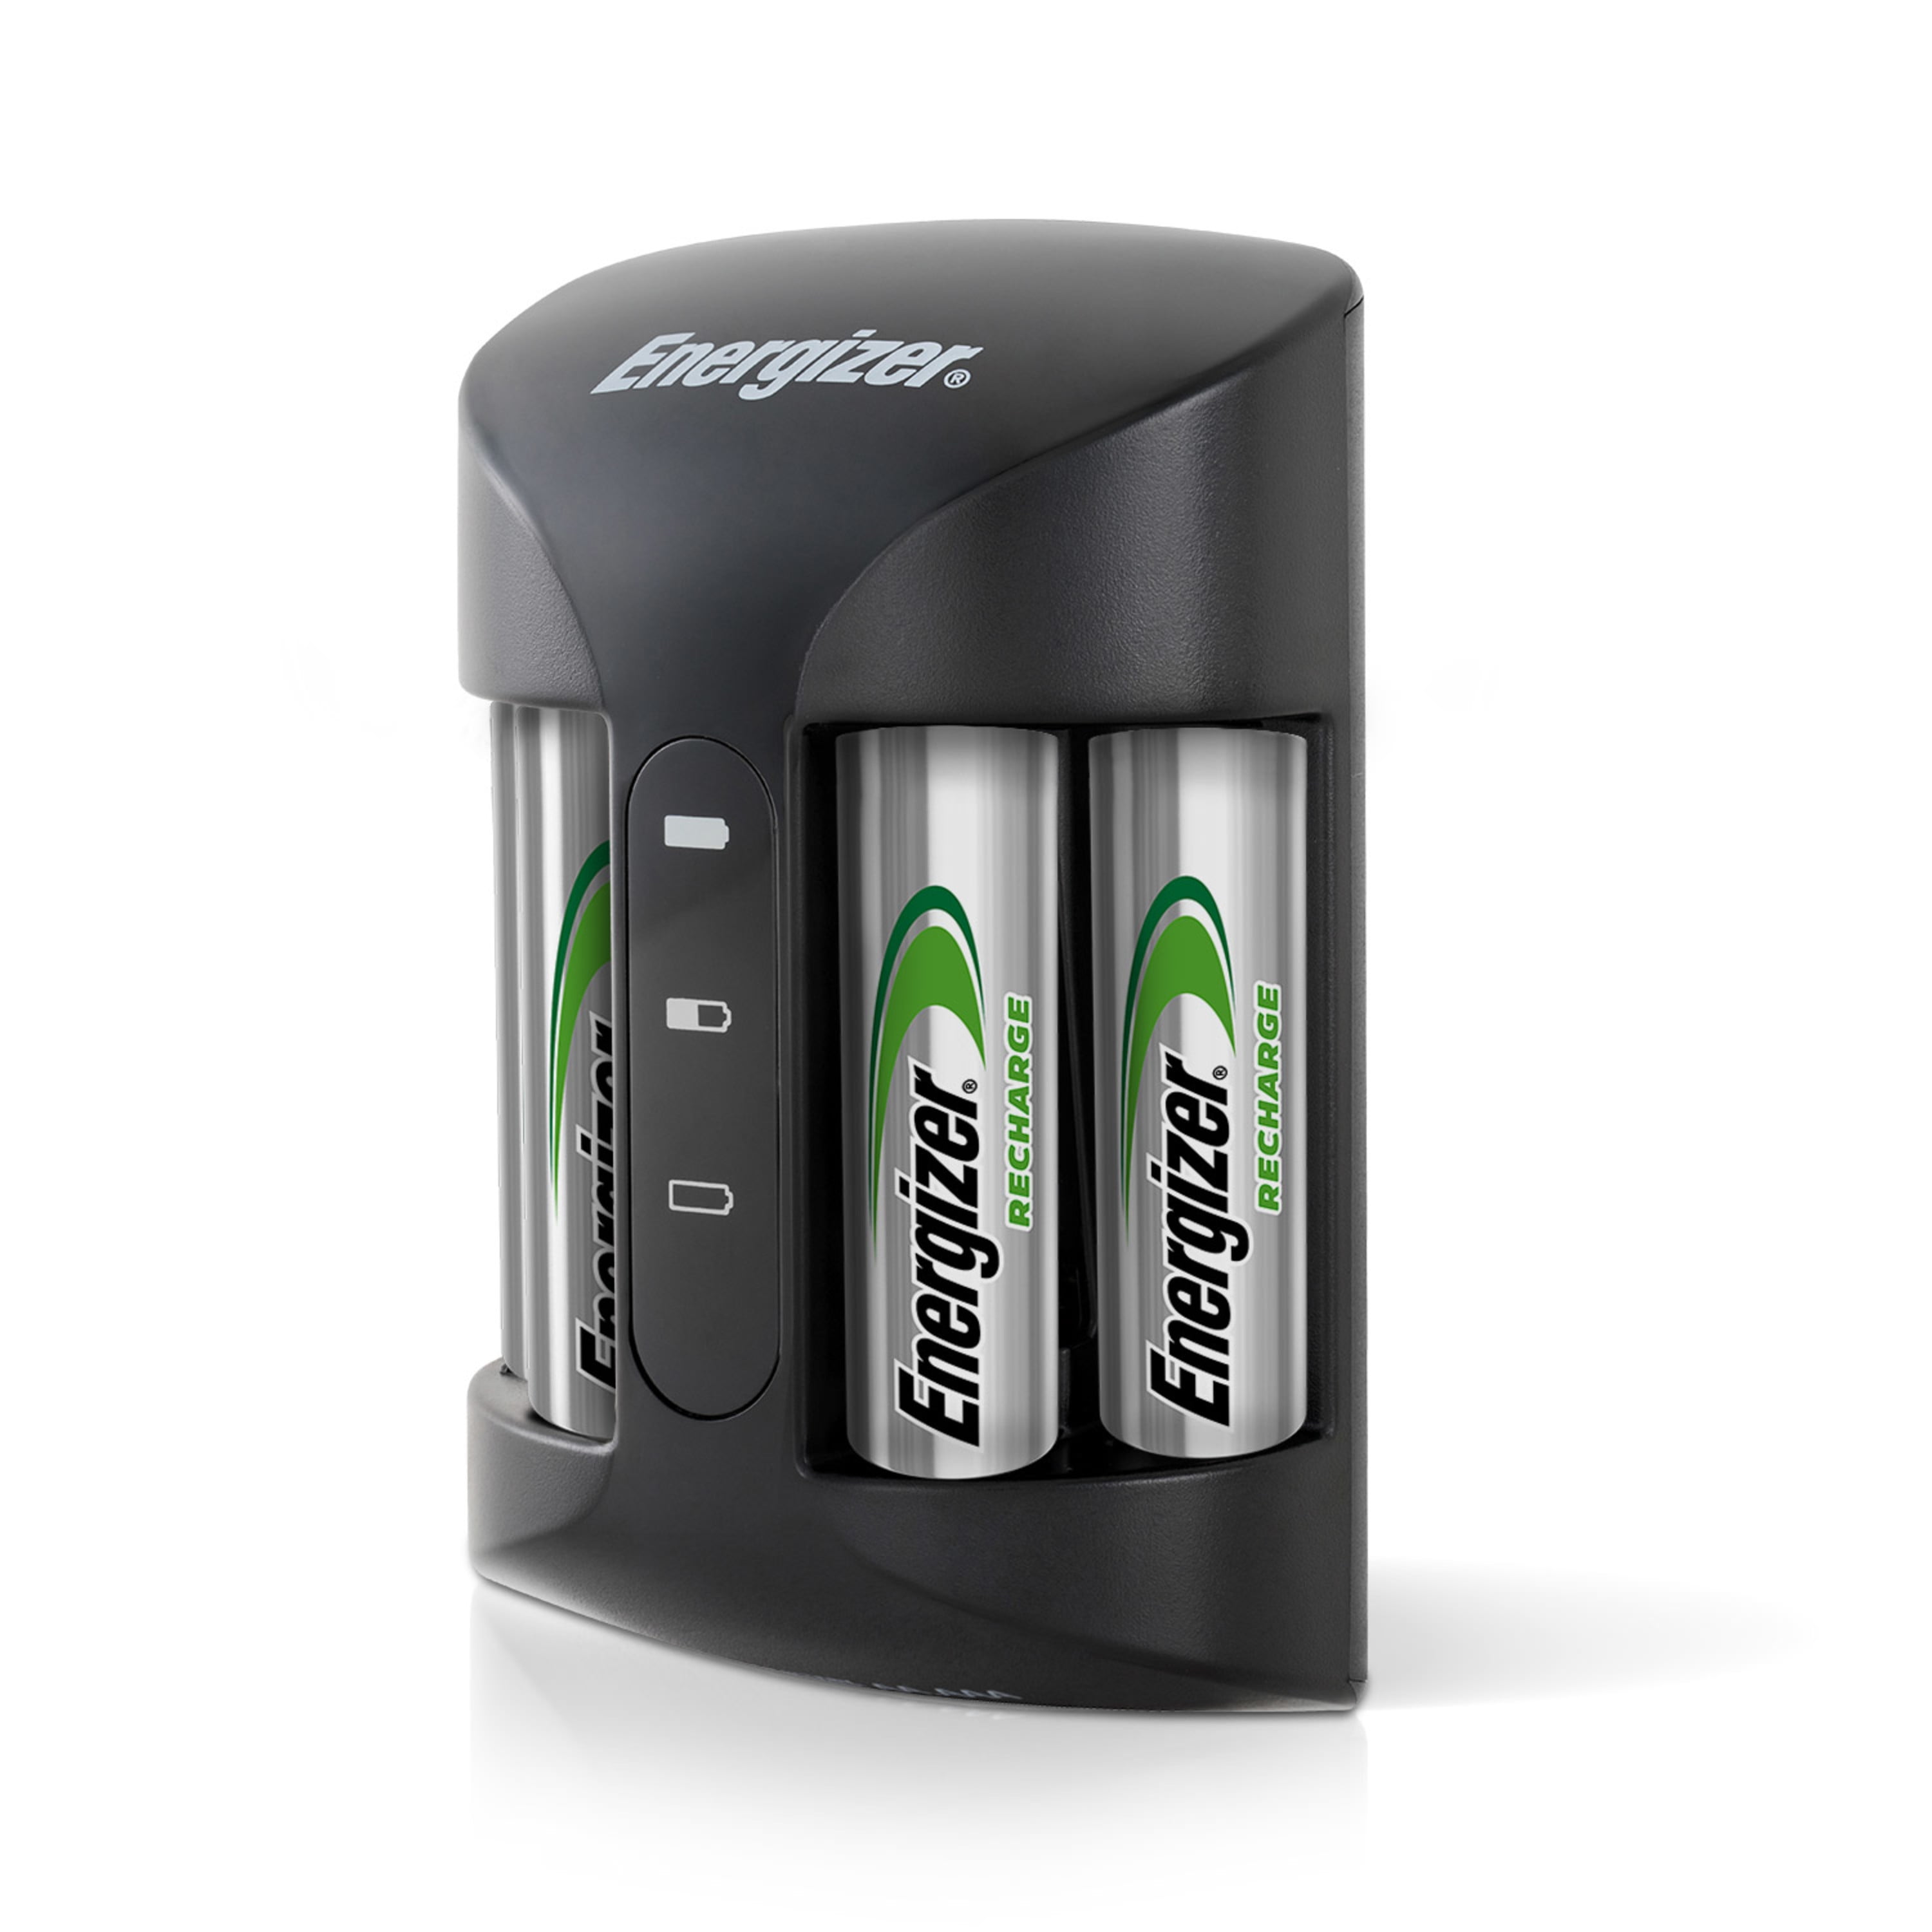 Annoteren Anekdote gek Energizer Rechargeable AA and AAA Battery Charger (Recharge Pro) with 4 AA  NiMH Rechargeable Batteries - Walmart.com